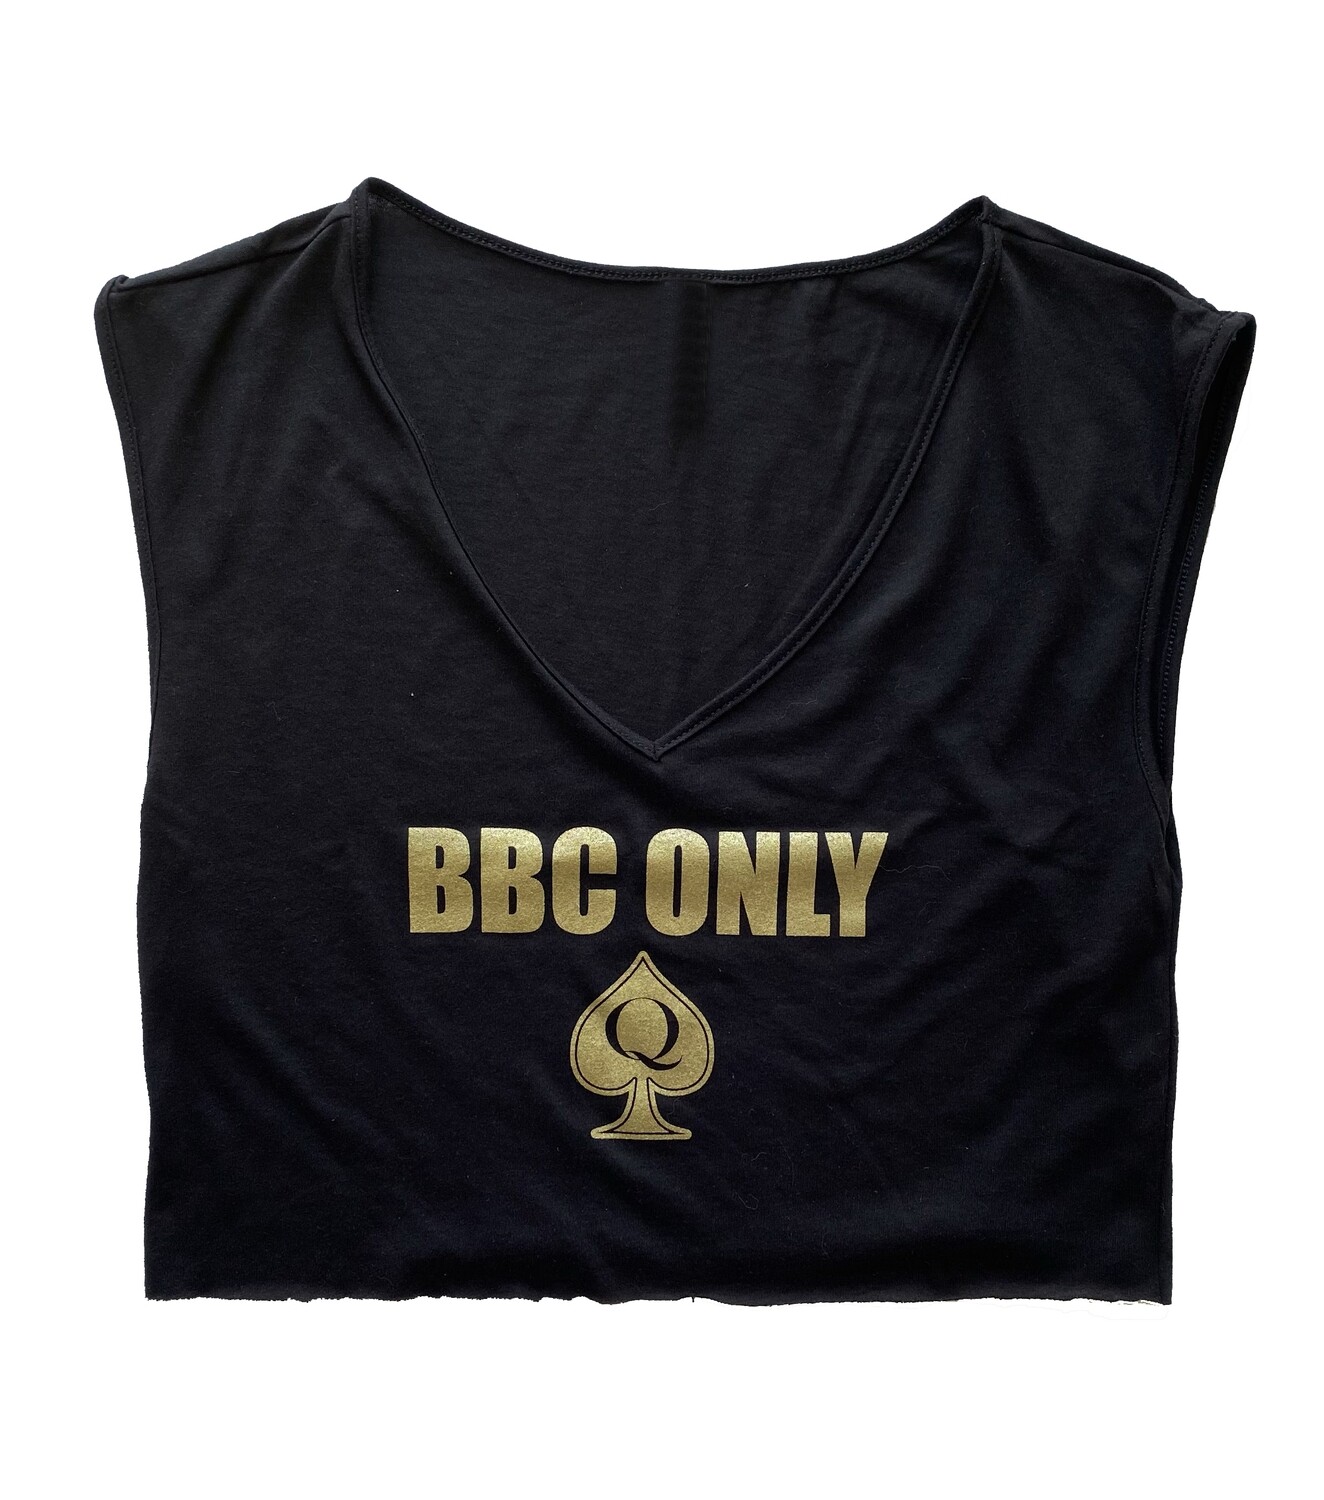 BBC Only (QoS) Queen of Spades Cropped V-Neck Tank Top